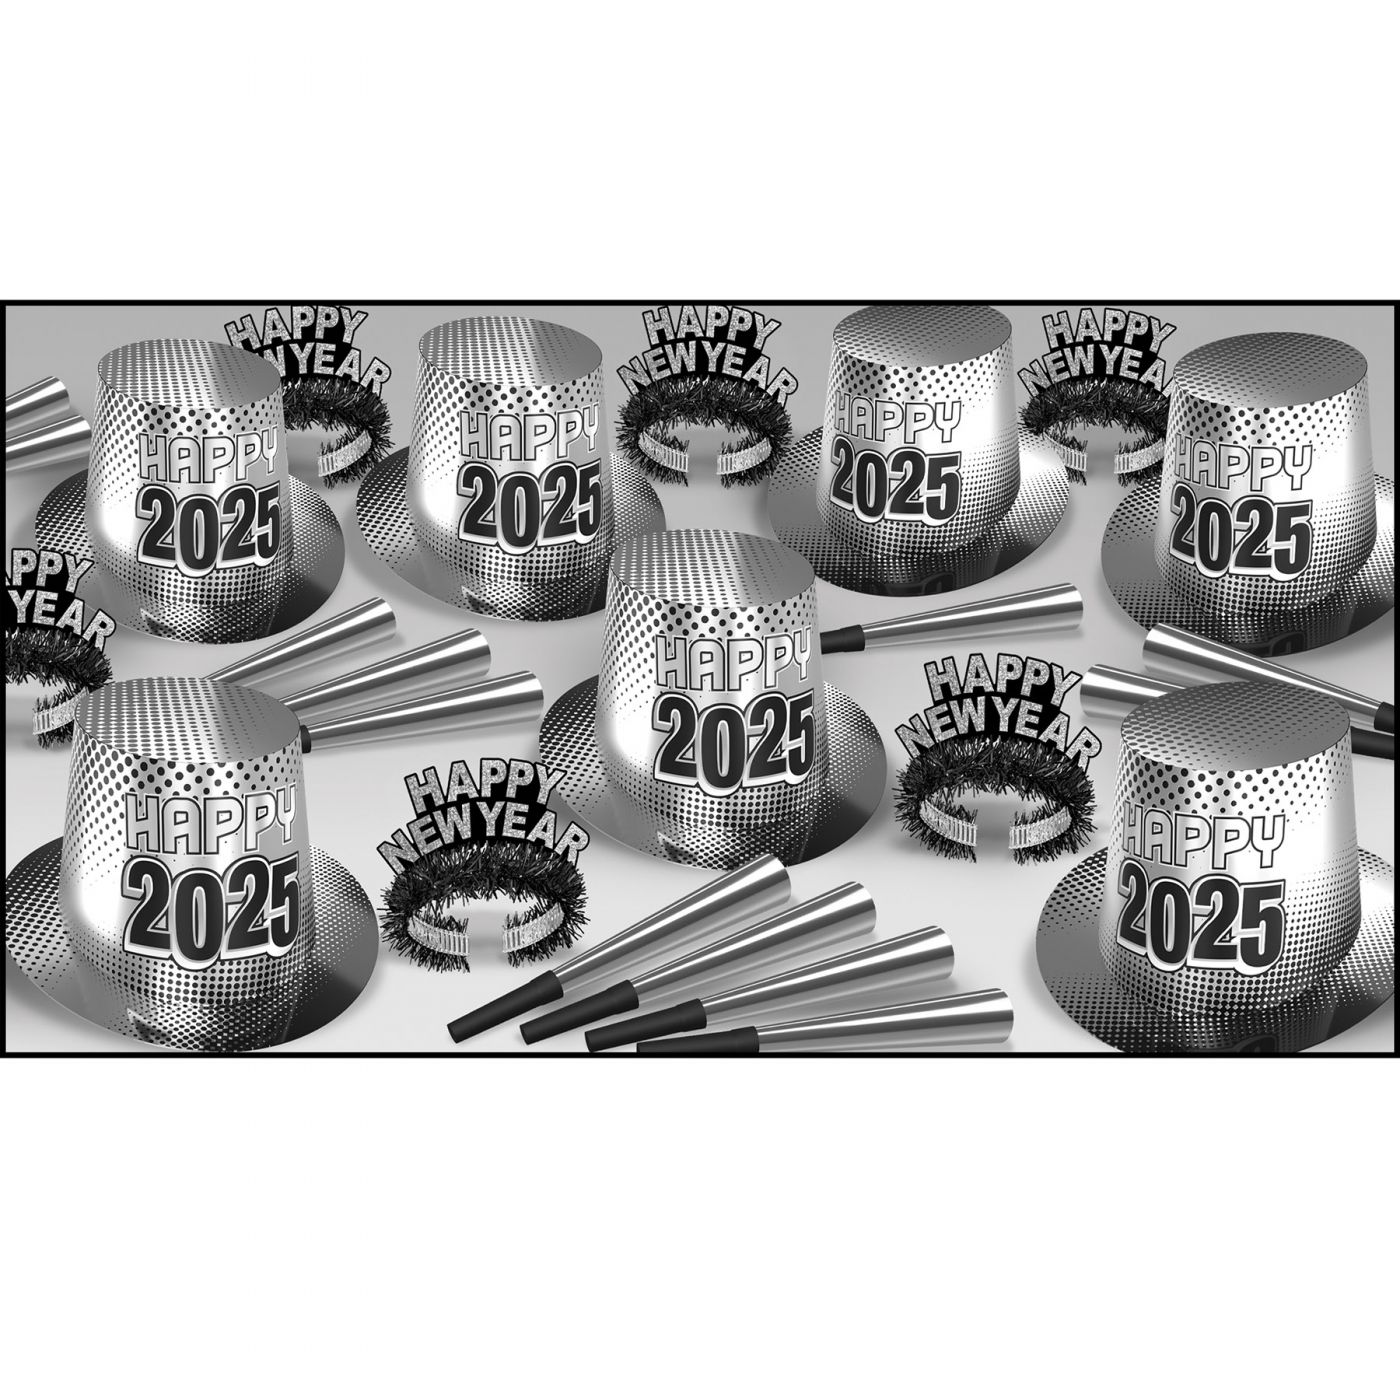 New Year 2025 Silver Assortment for 50 (1) image